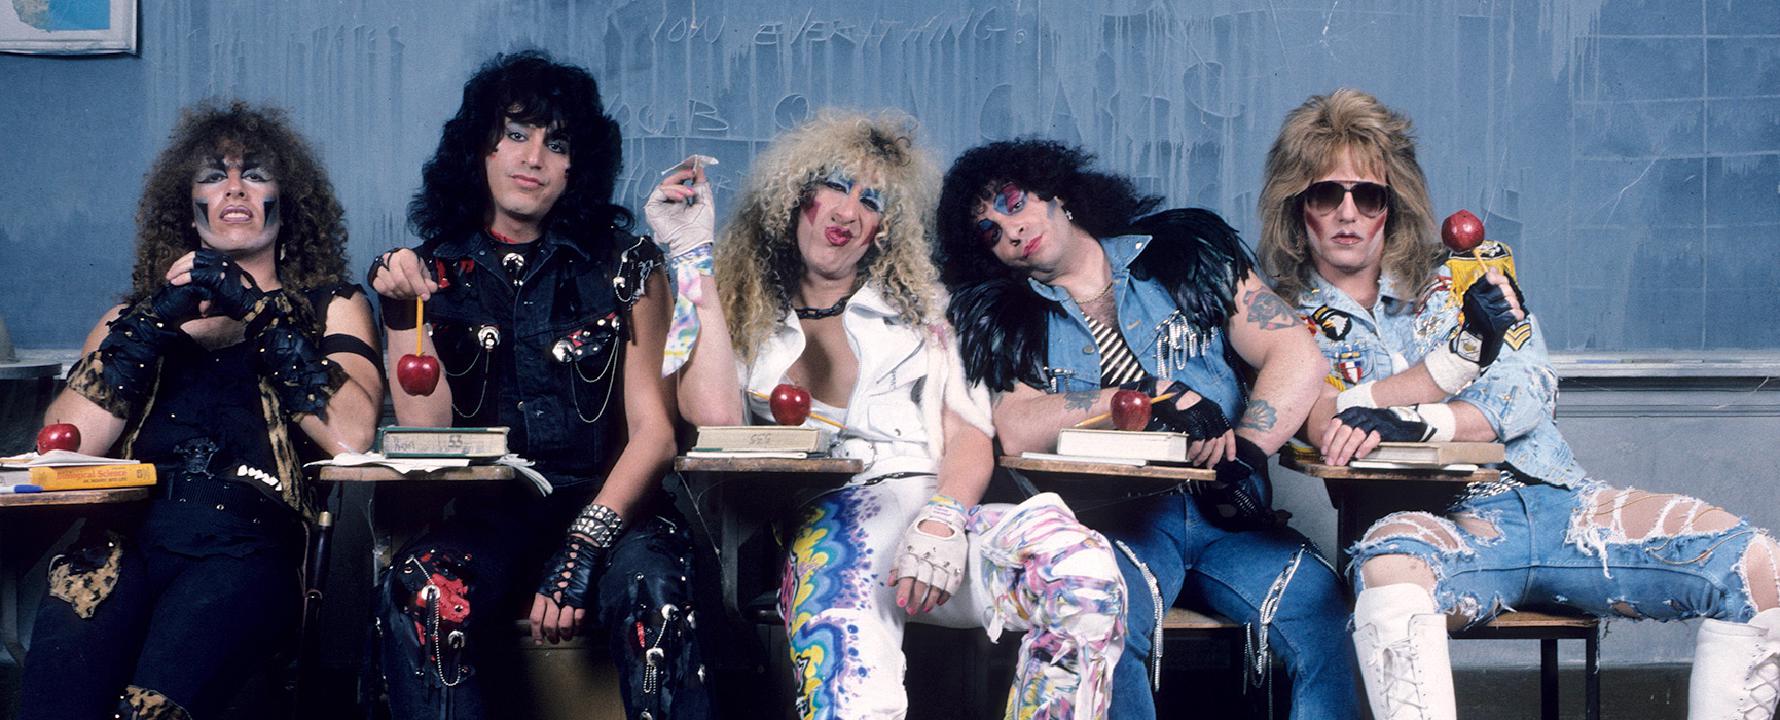 Promotional photograph of Twisted Sister.